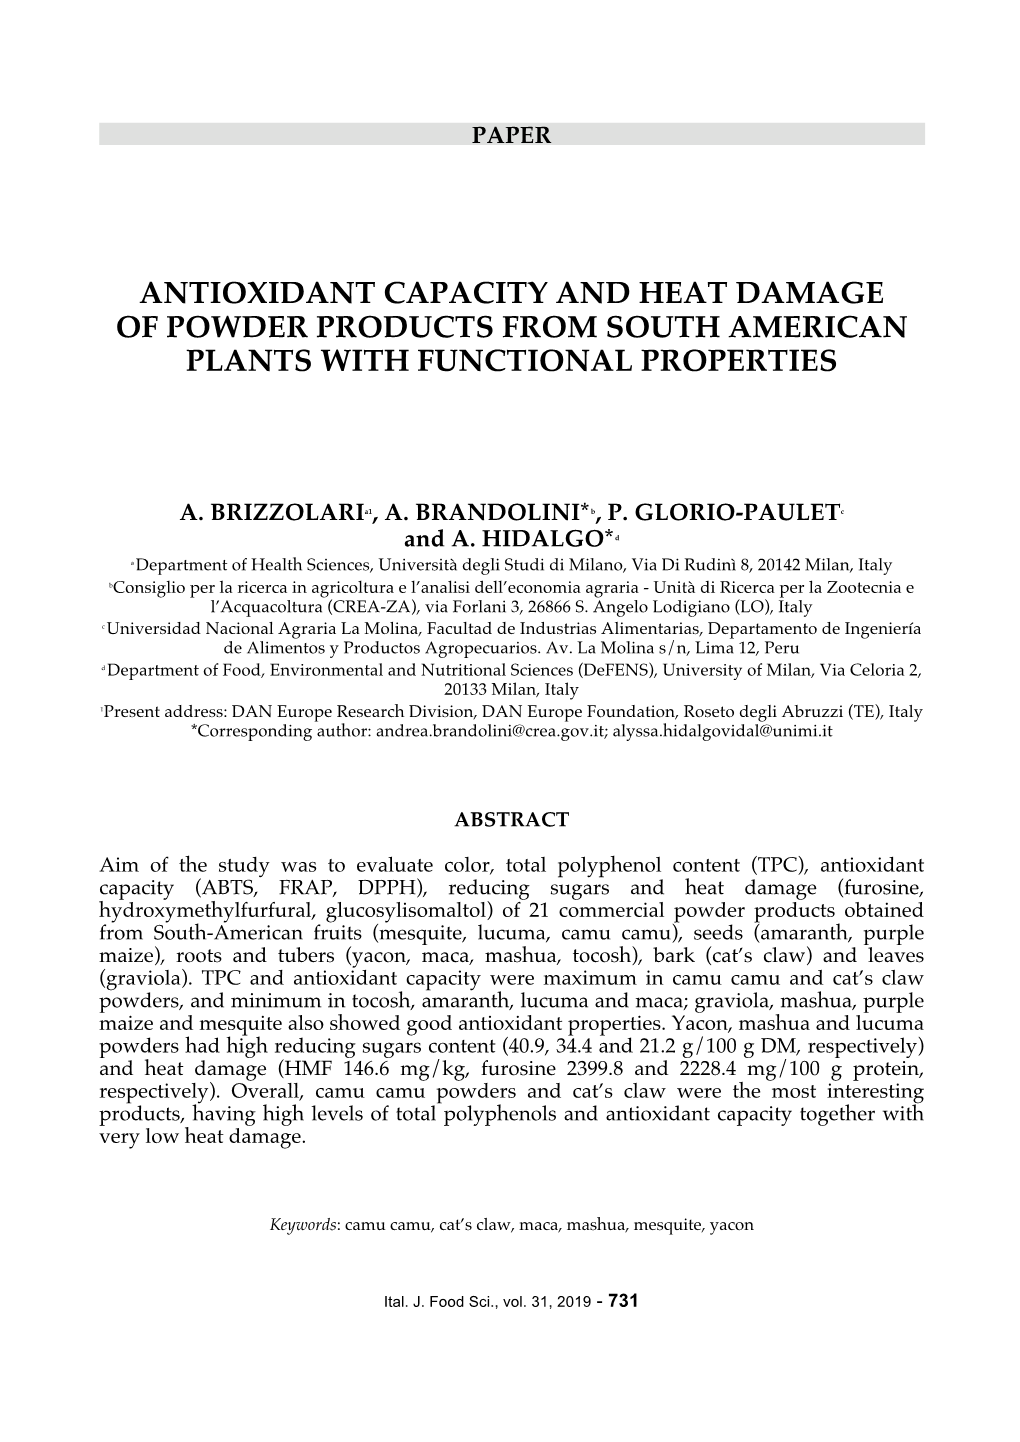 Antioxidant Capacity and Heat Damage of Powder Products from South American Plants with Functional Properties